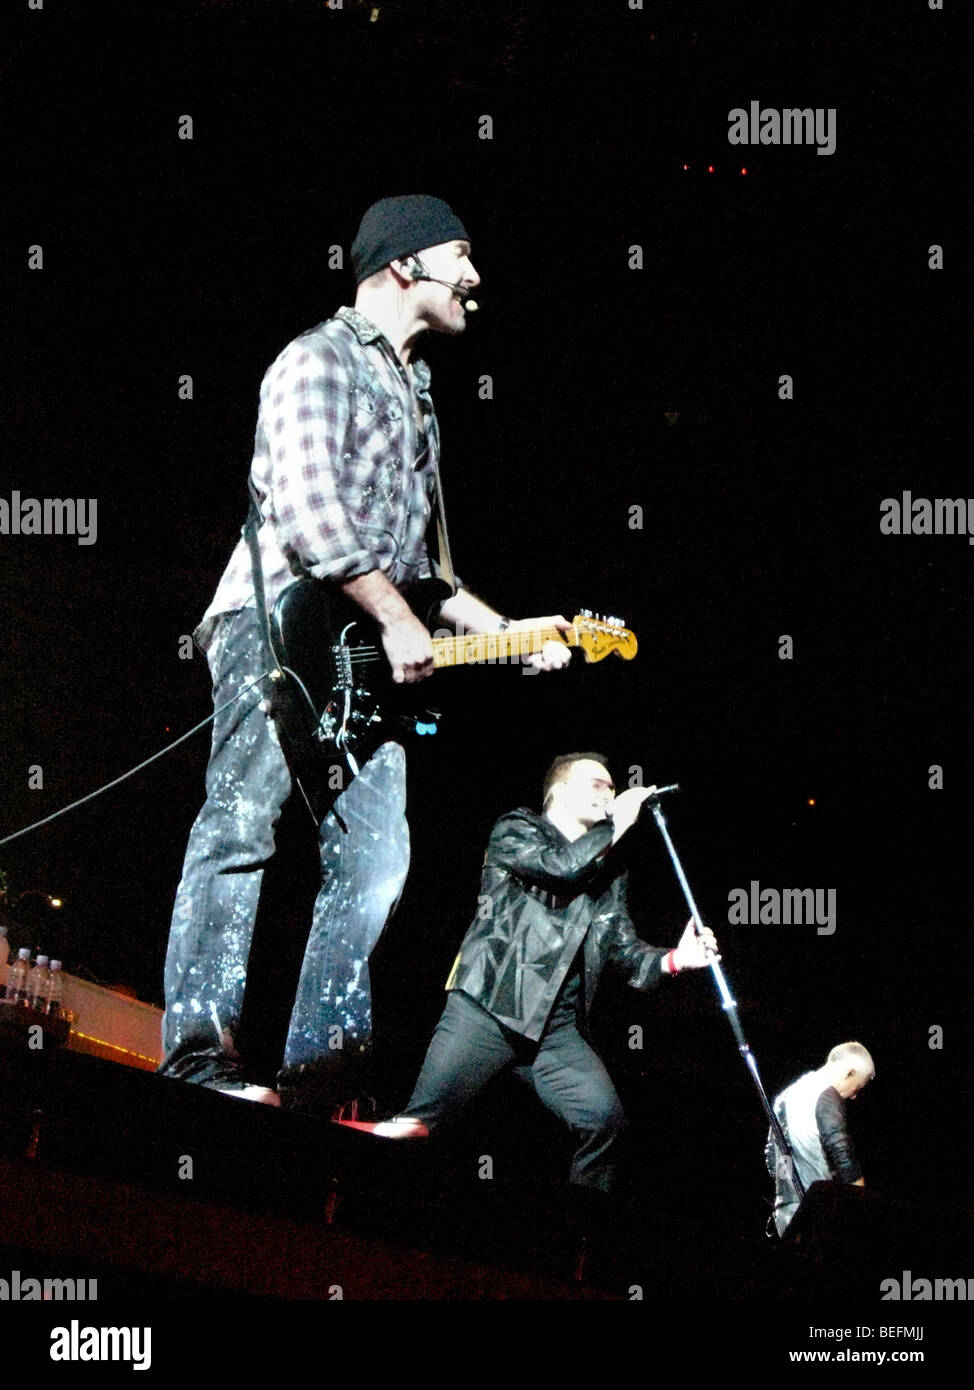 The Edge, guitarist of the Irish rock band U2, performs live with vocalist Bono and bassist Adam Clayton during their 360 Tour. Stock Photo